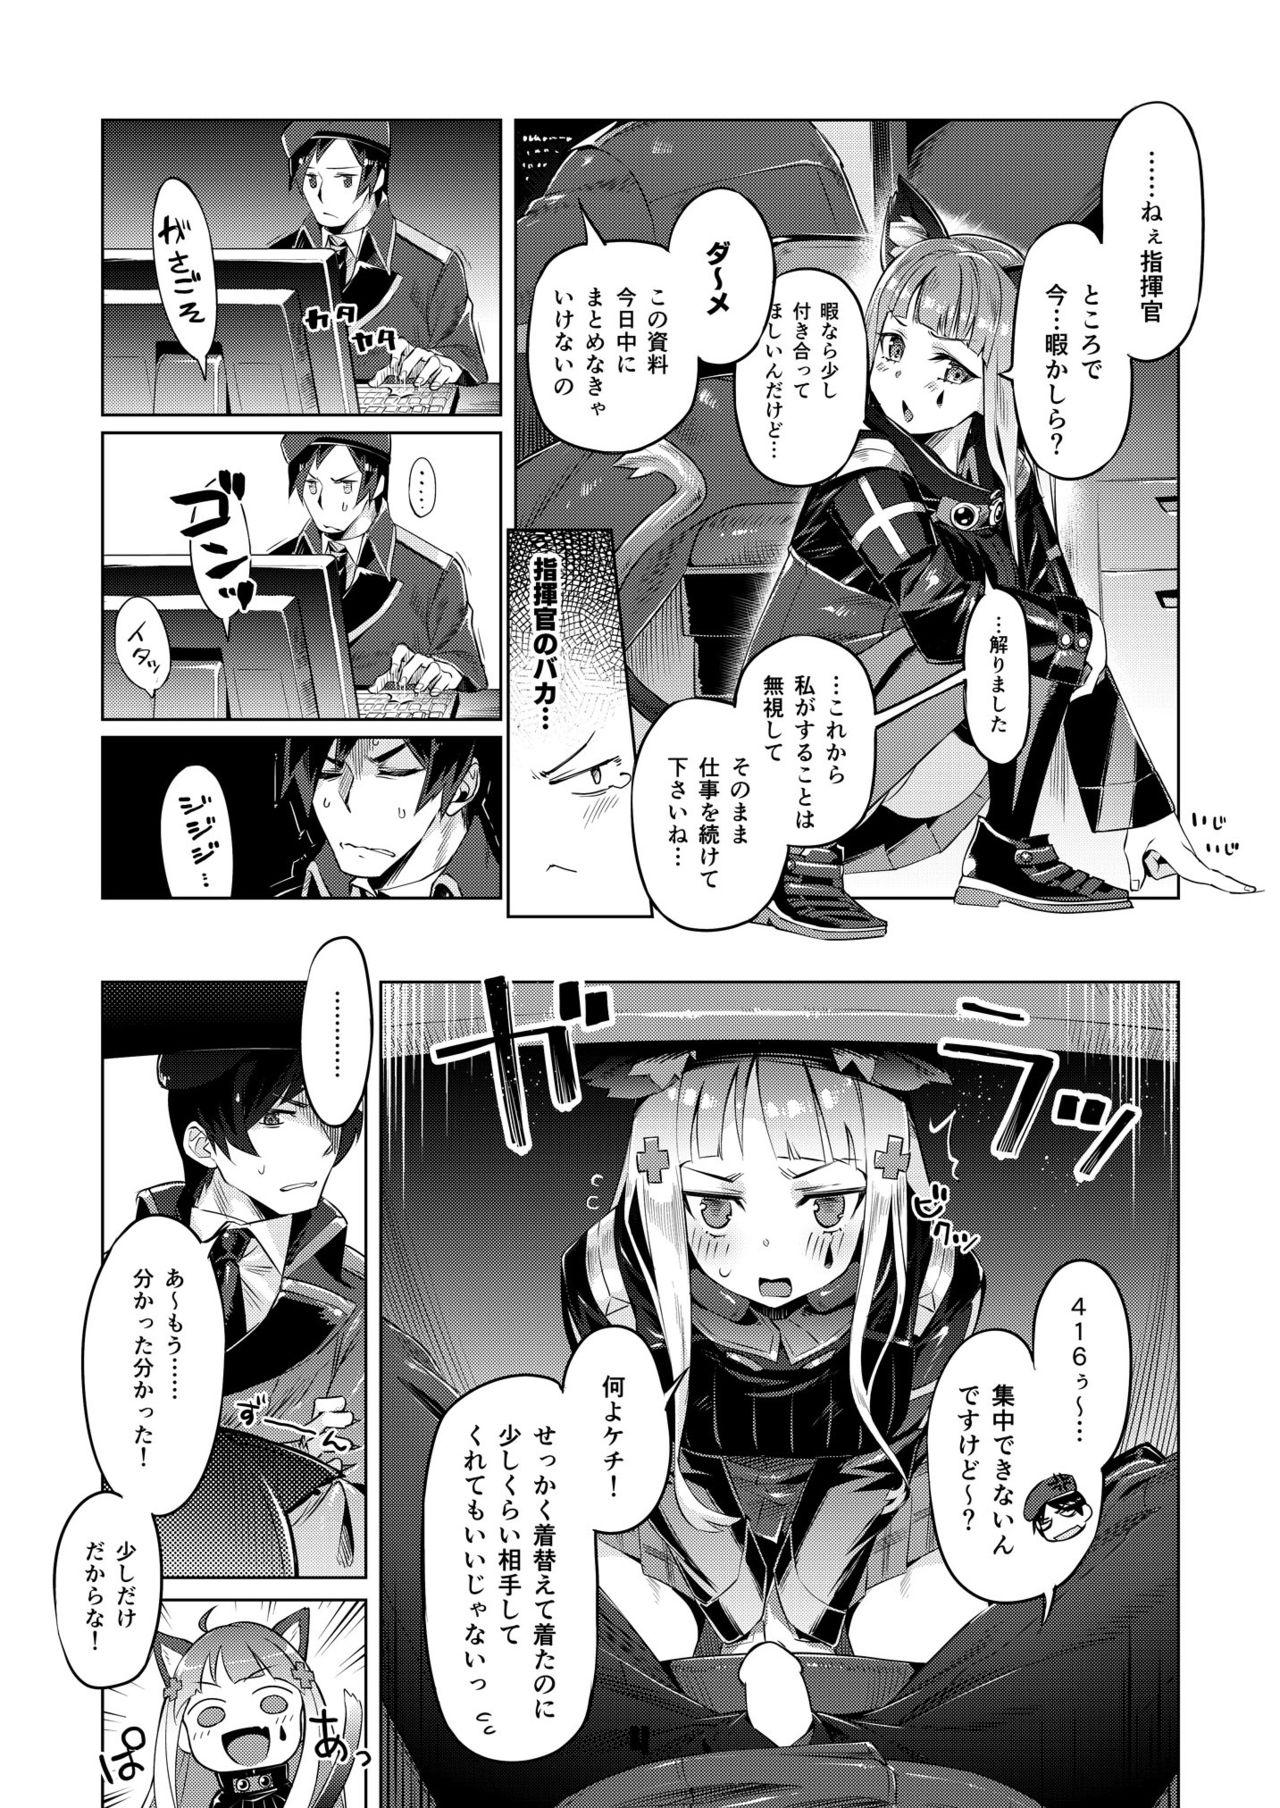 Roleplay Nekomimi Attachment - Girls frontline Party - Page 4